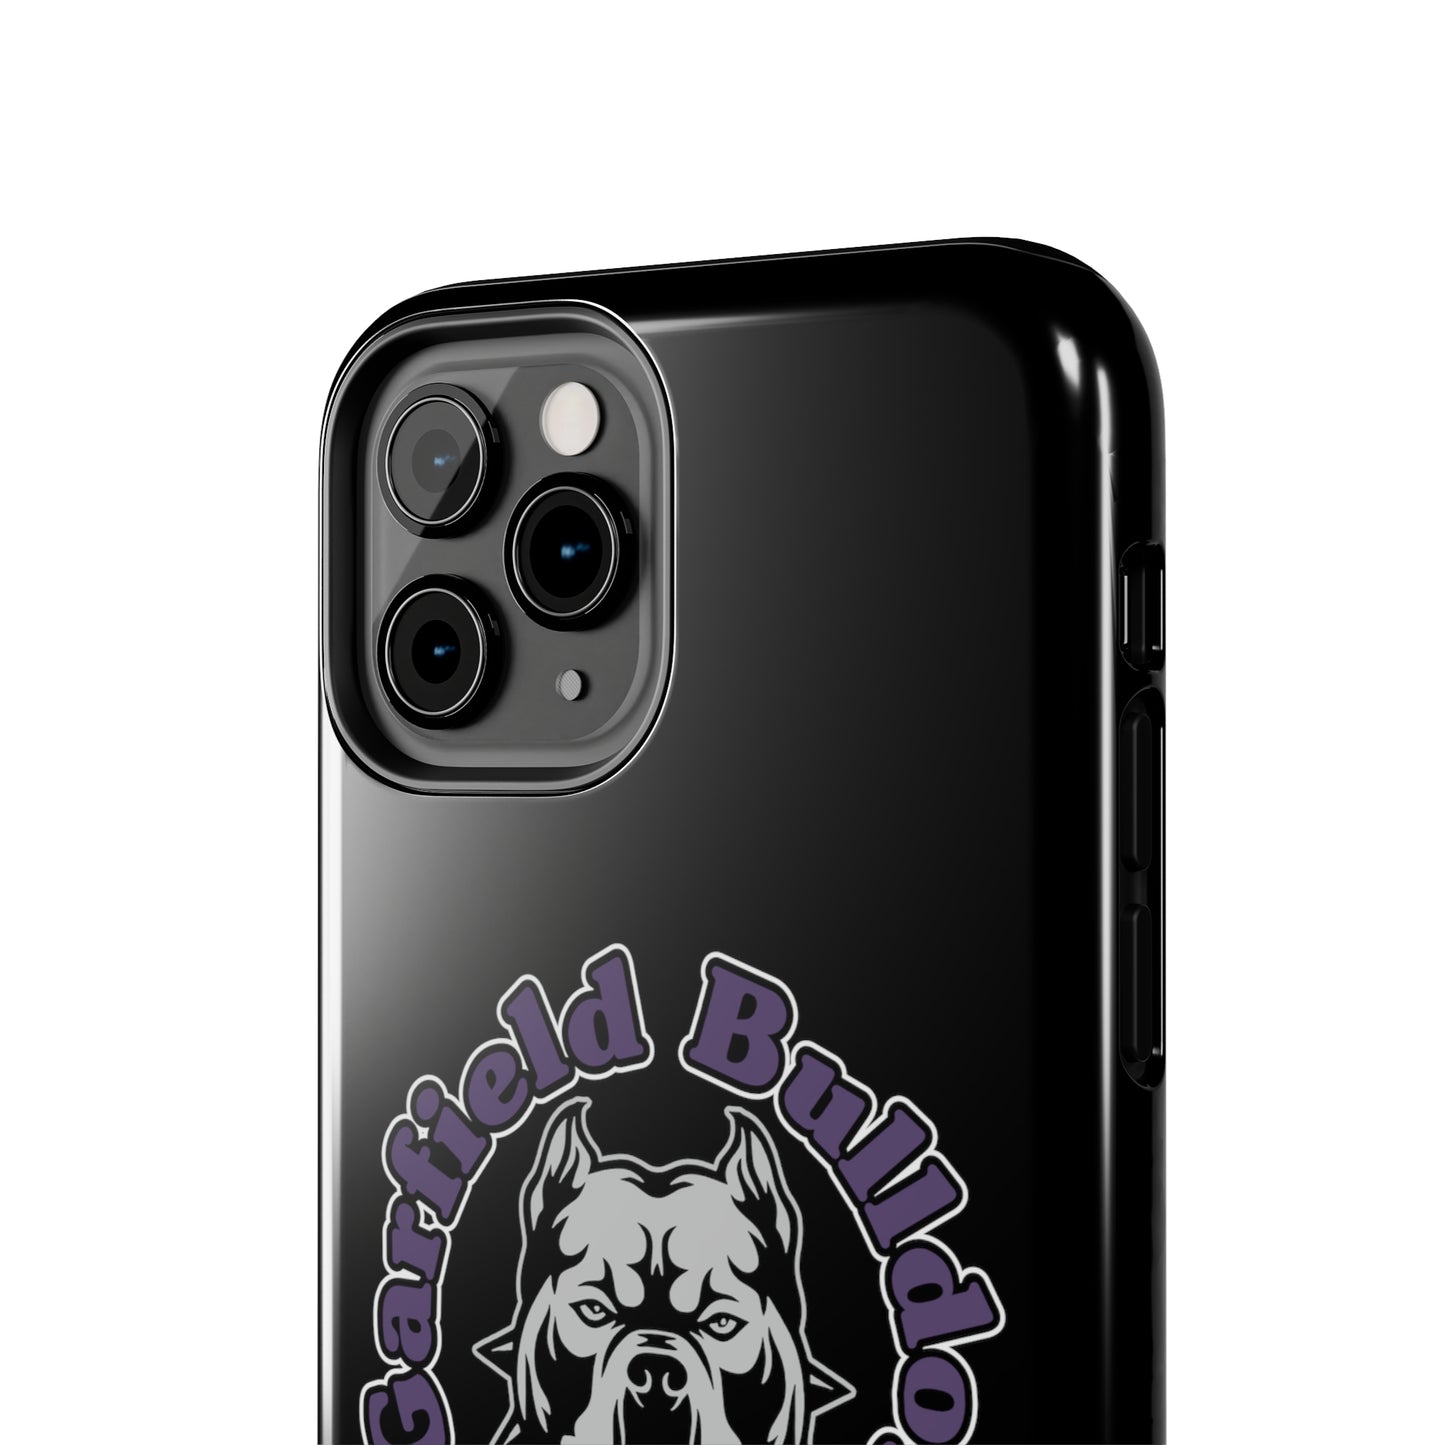 Garfield Bulldog 4 Lyfe iPhone Case (Compatible with iPhone 7-14),Tough Phone Cases